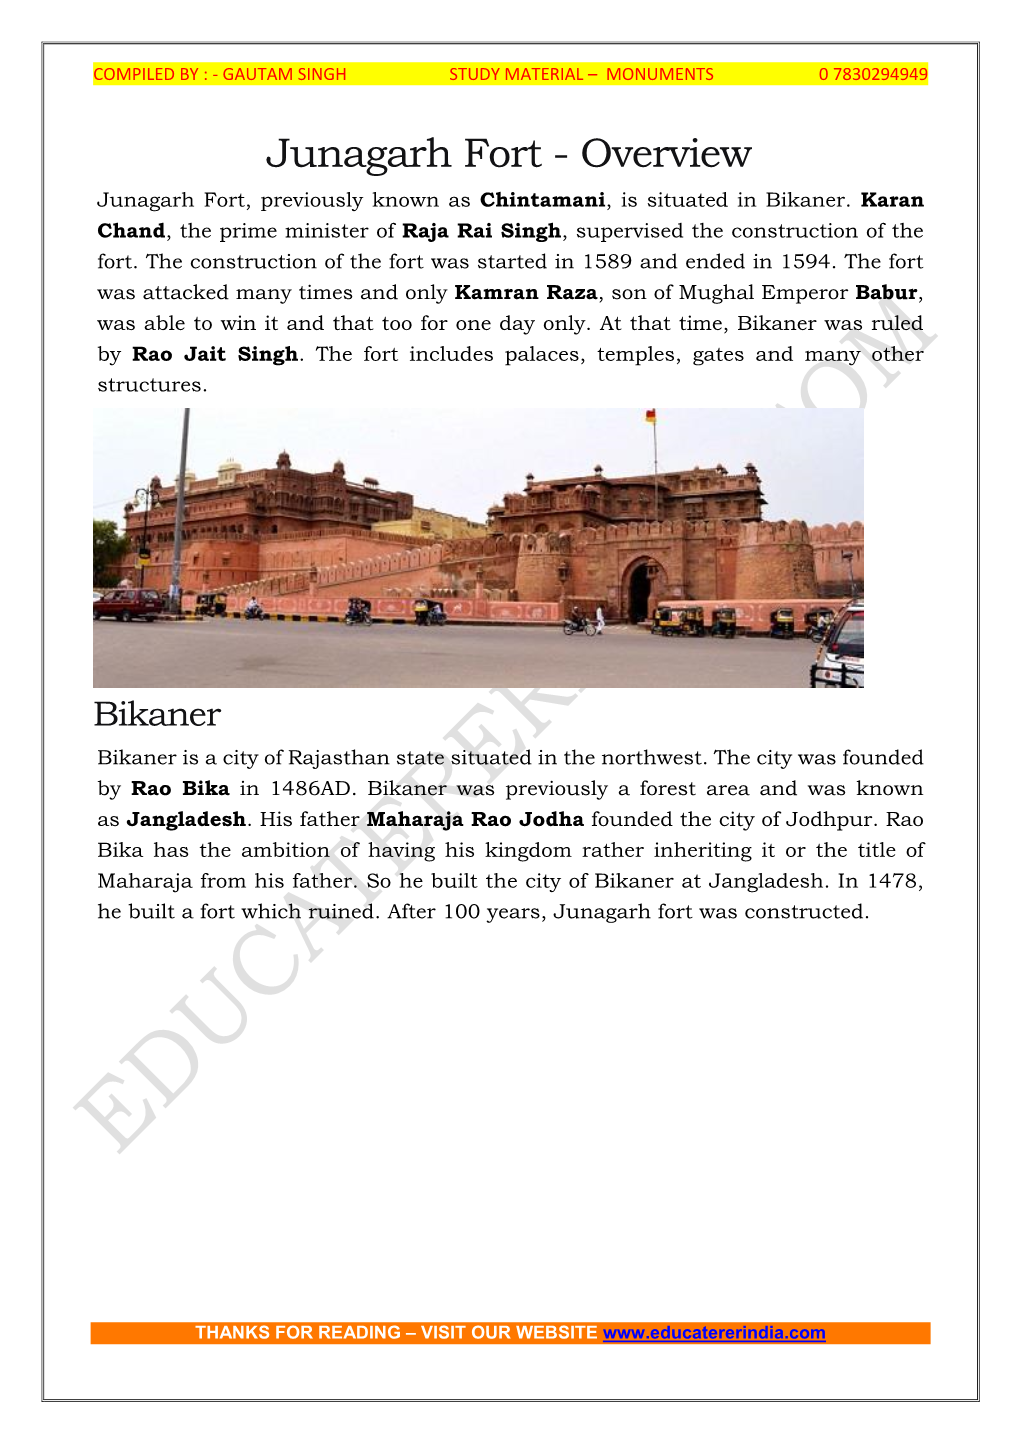 Junagarh Fort - Overview Junagarh Fort, Previously Known As Chintamani, Is Situated in Bikaner